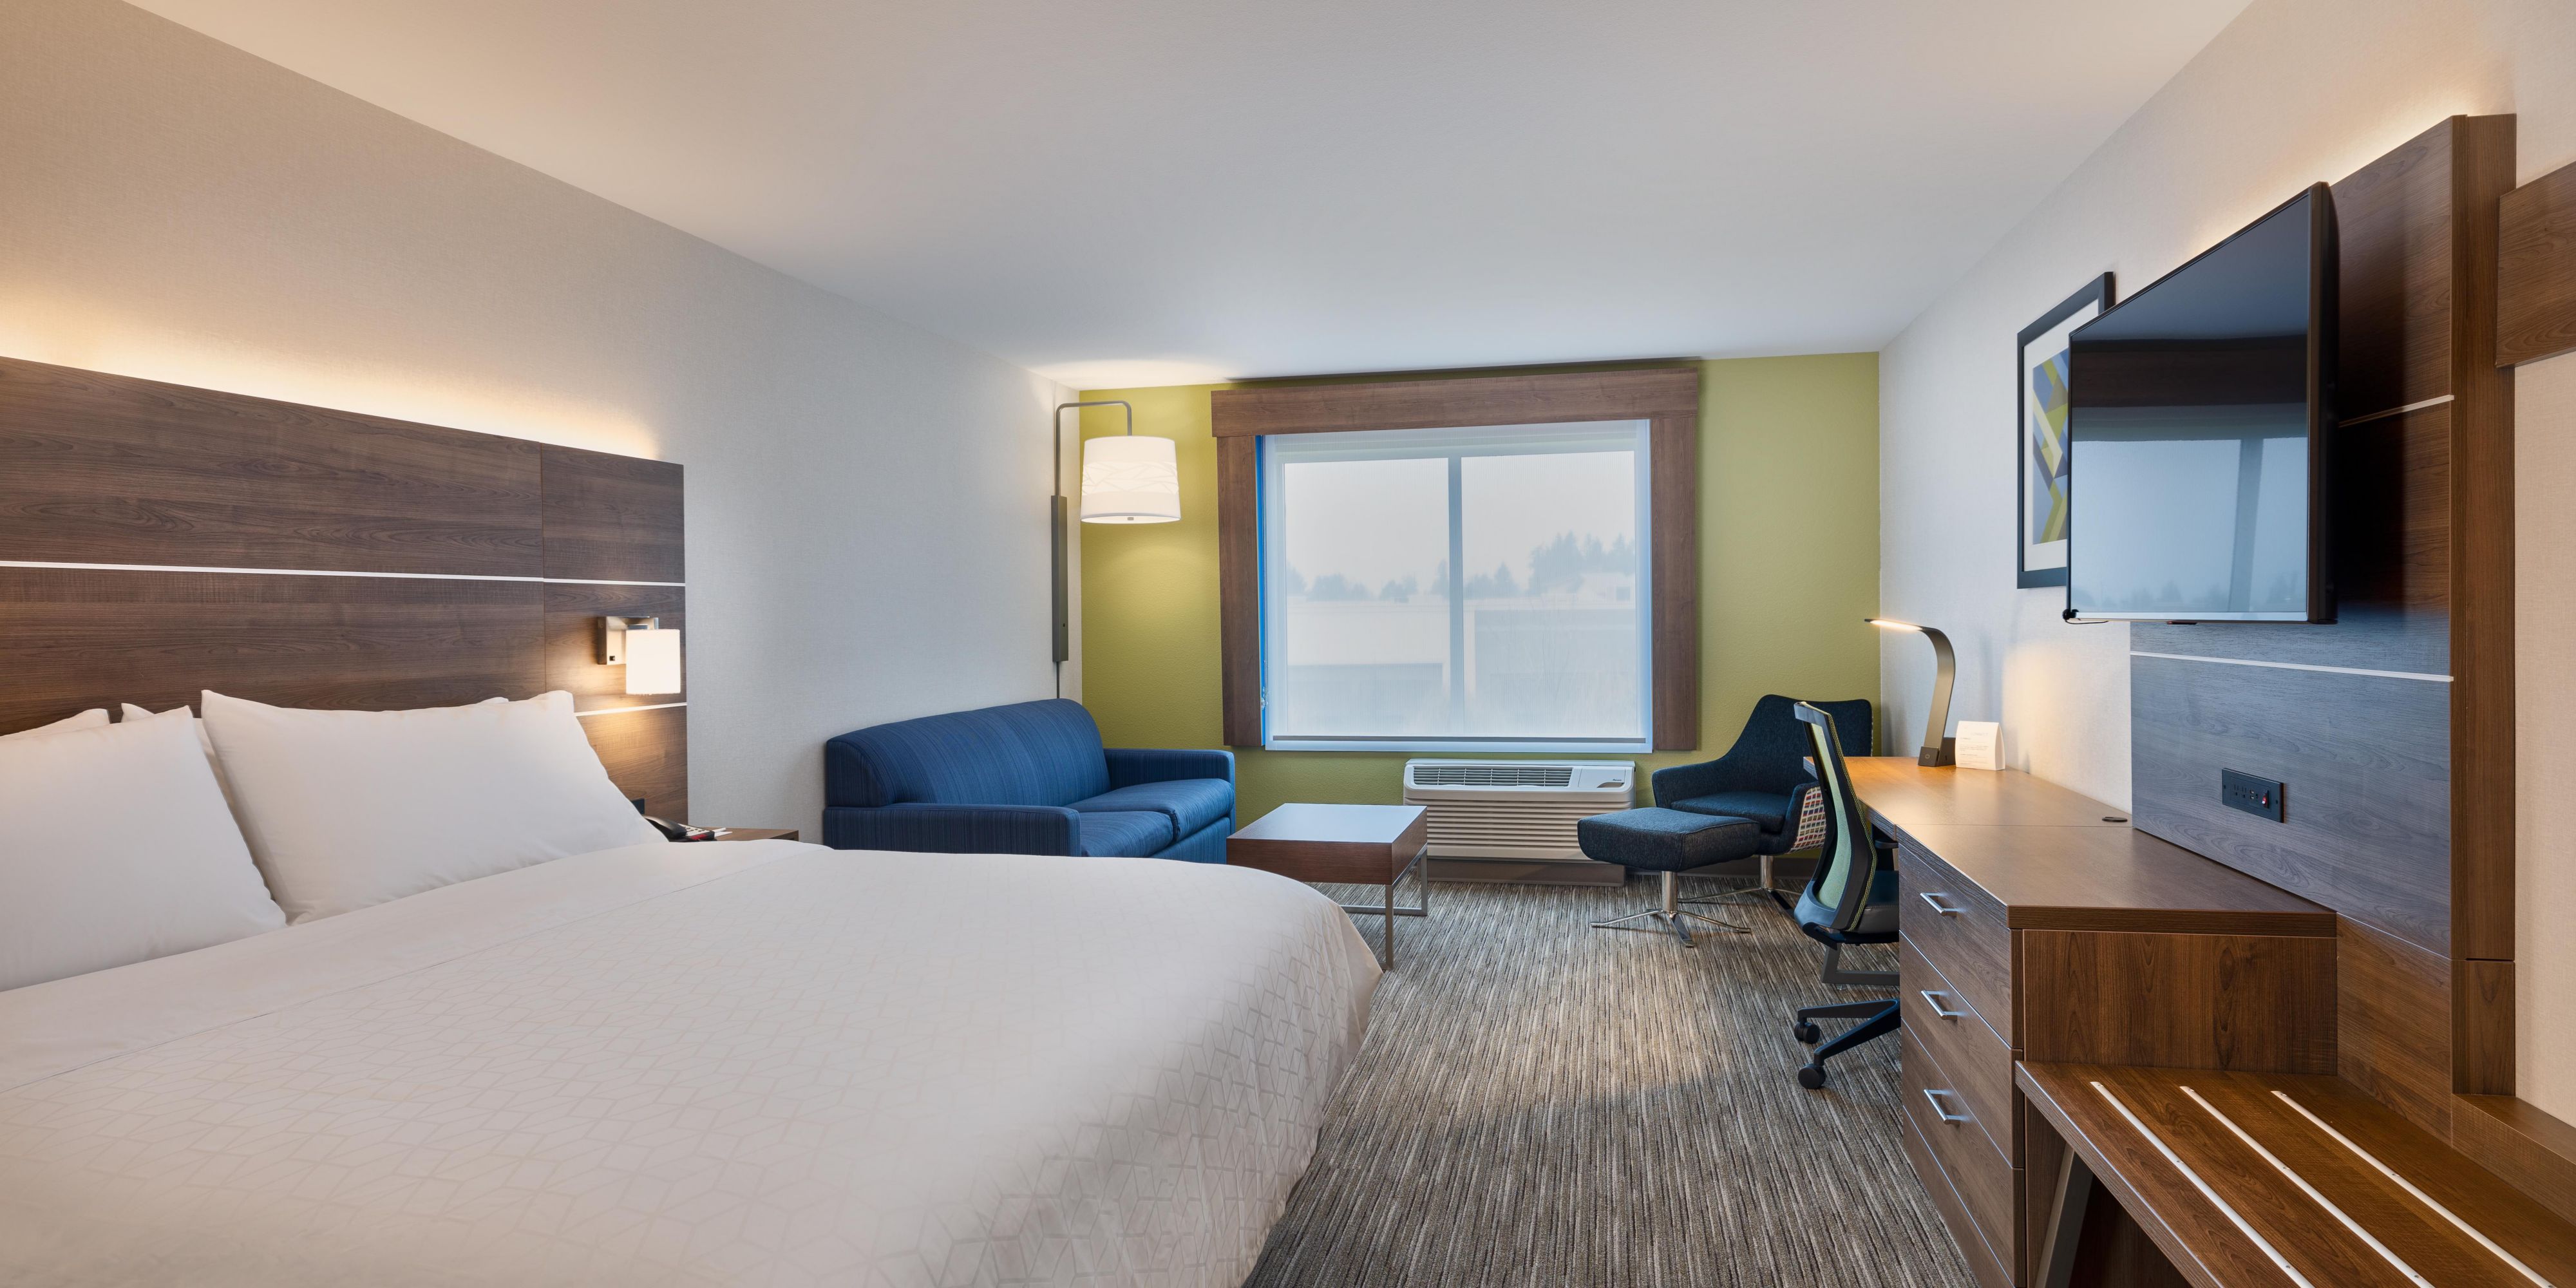 We offer several King Suites that include an additional living area with a pullout sofa bed. Great for families or individual travelers just looking for a little more room!